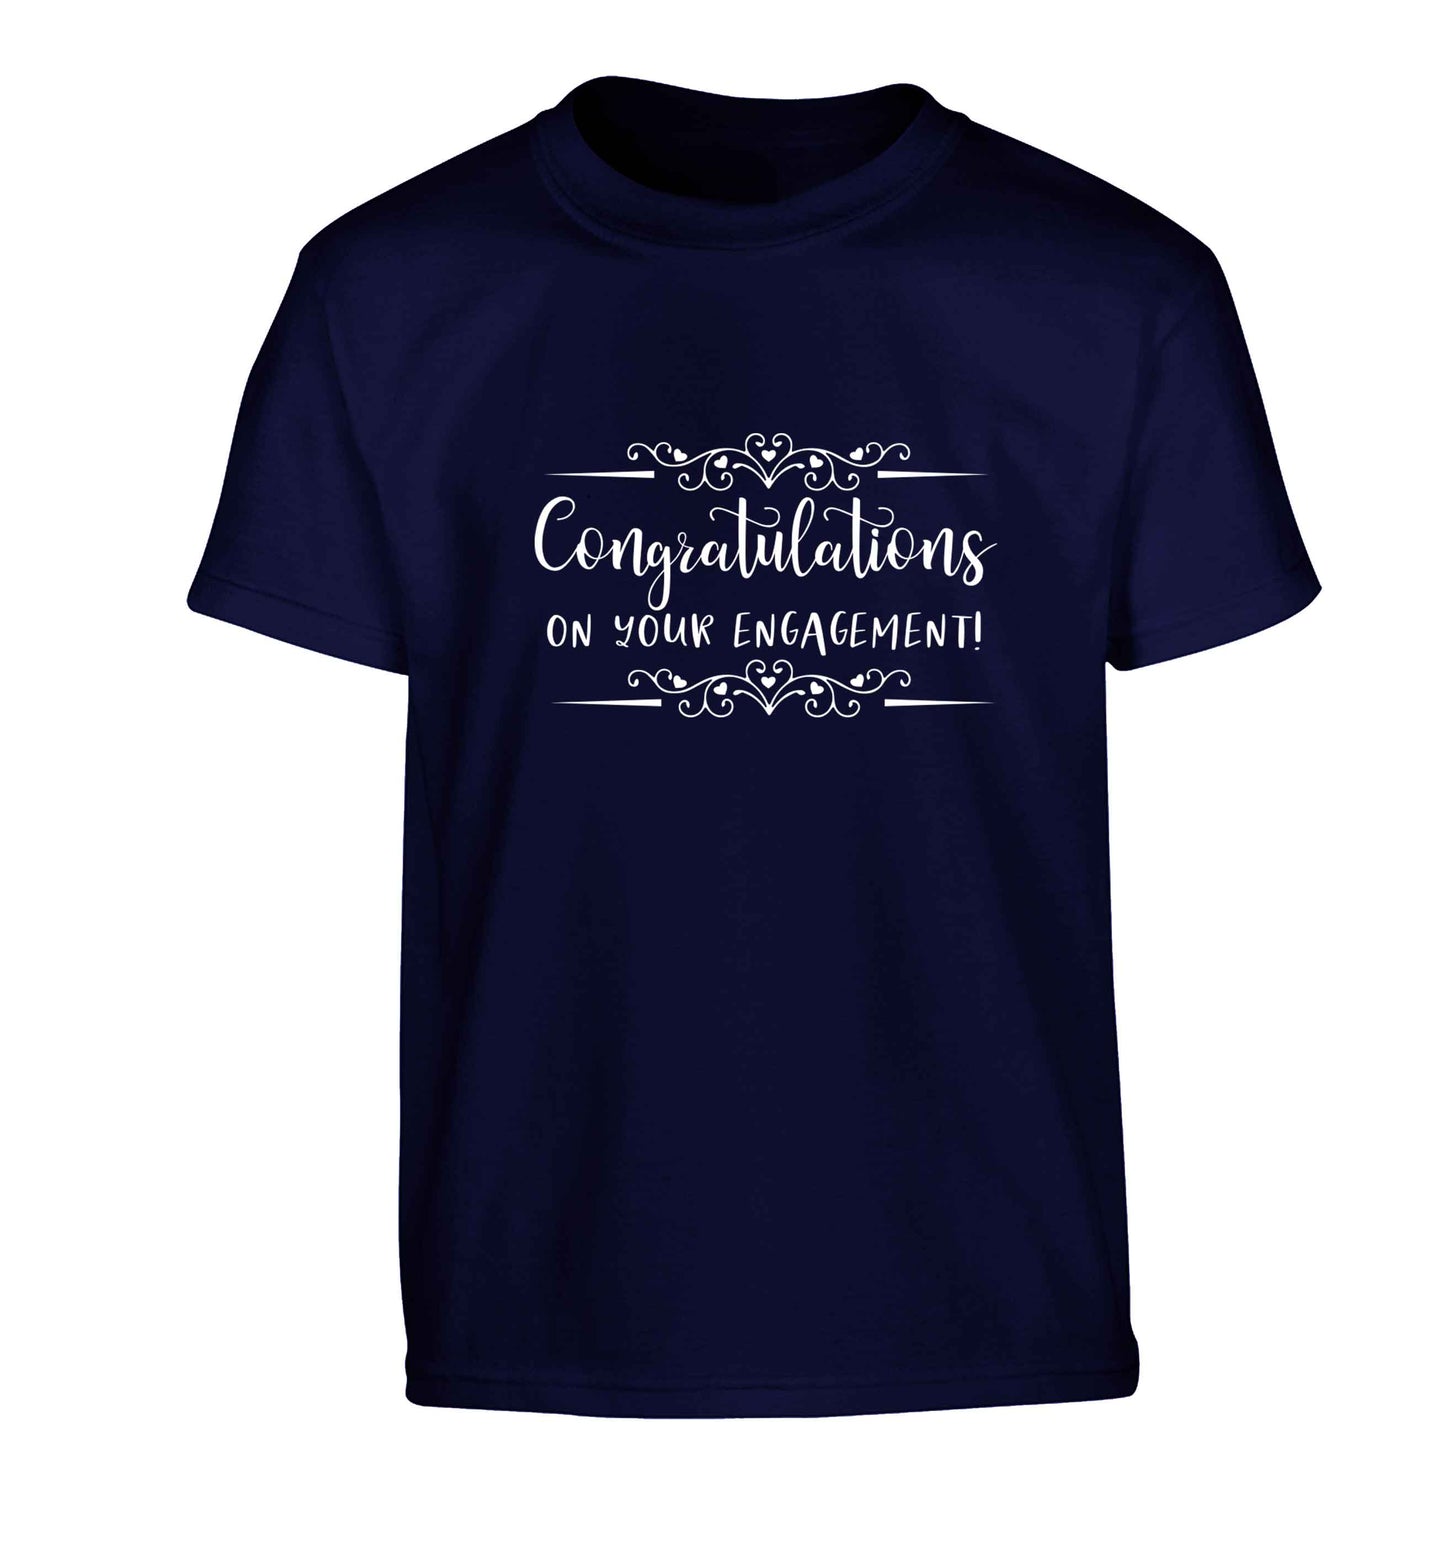 Congratulations on your engagement Children's navy Tshirt 12-13 Years